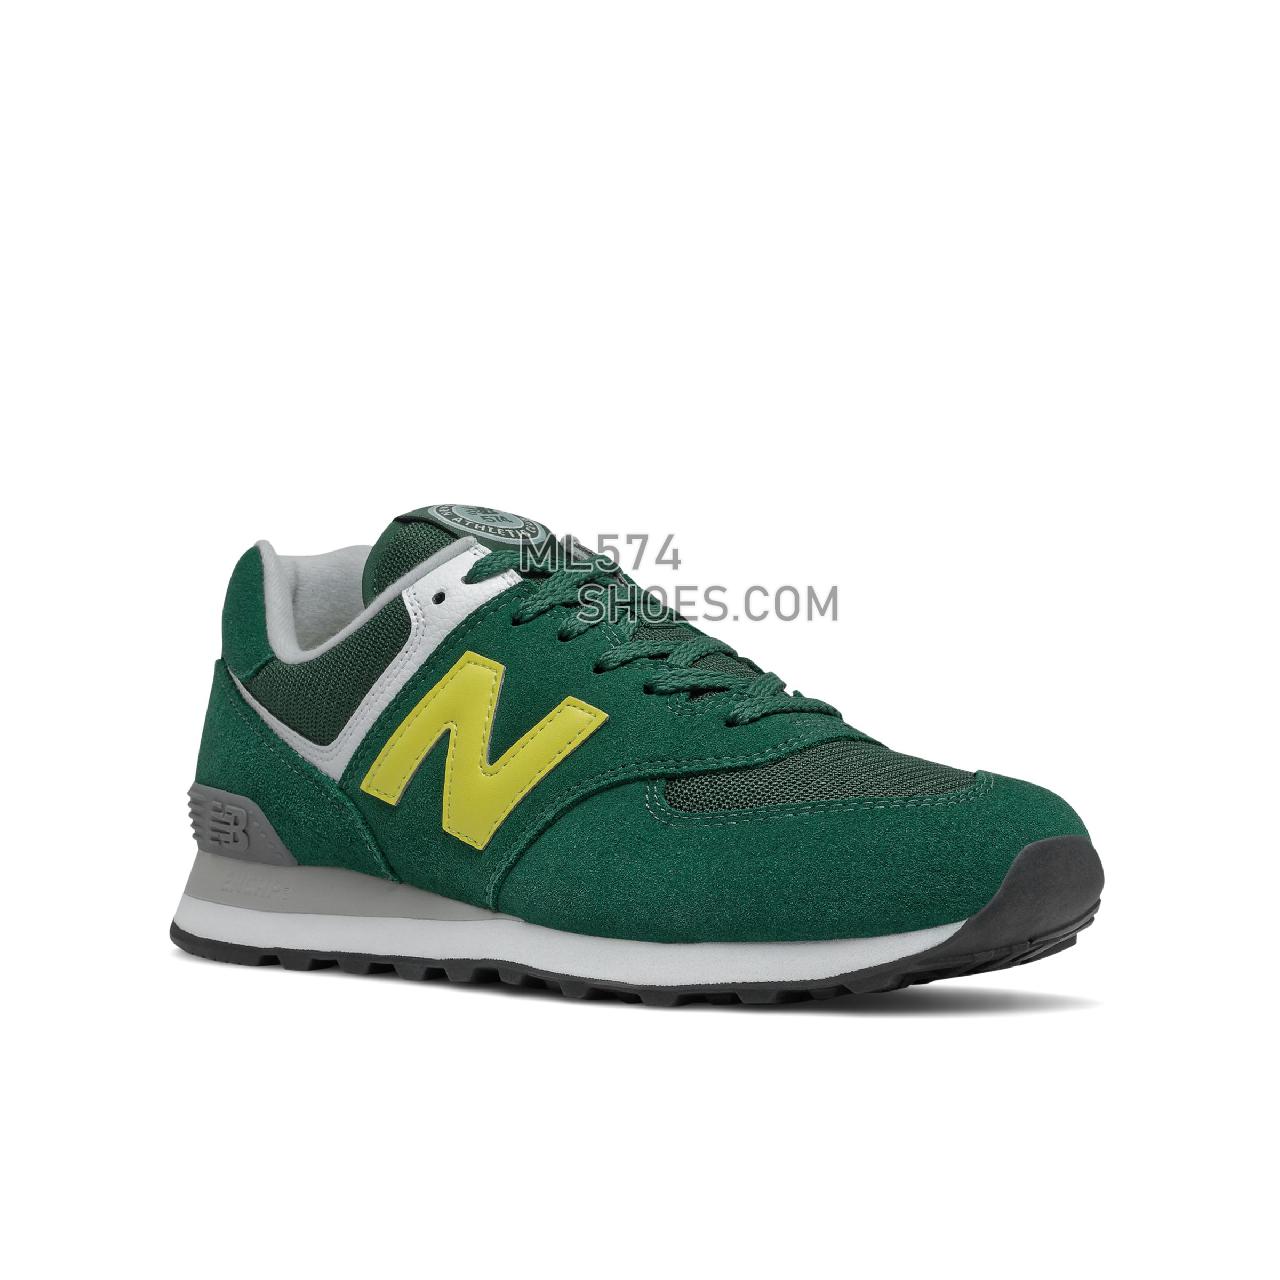 New Balance 574v2 - Men's Classic Sneakers - Nightwatch Green with Yellow - ML574HZ2